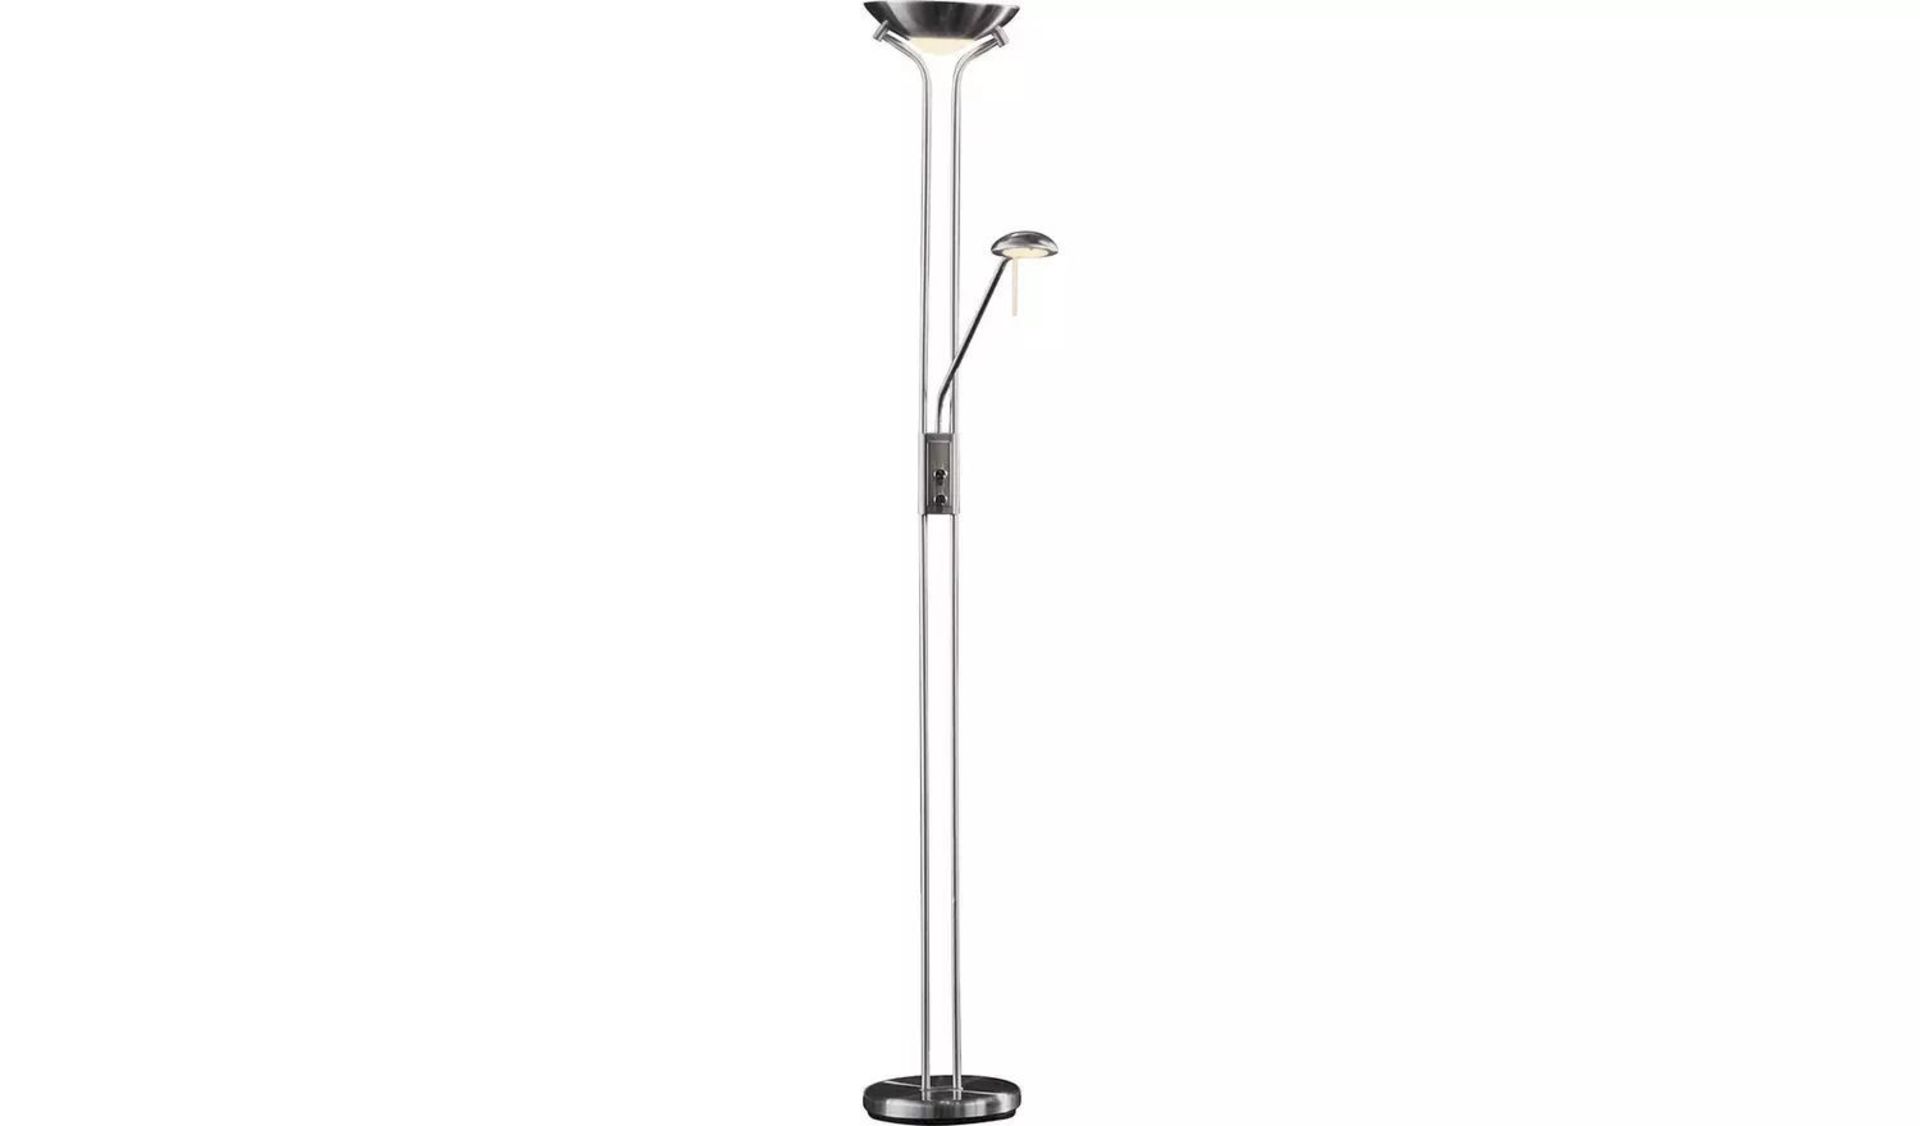 Home Father & Child Uplighter Floor Lamp - Chrome . - R14.2. This sleek and versatile Father&Child - Image 2 of 2